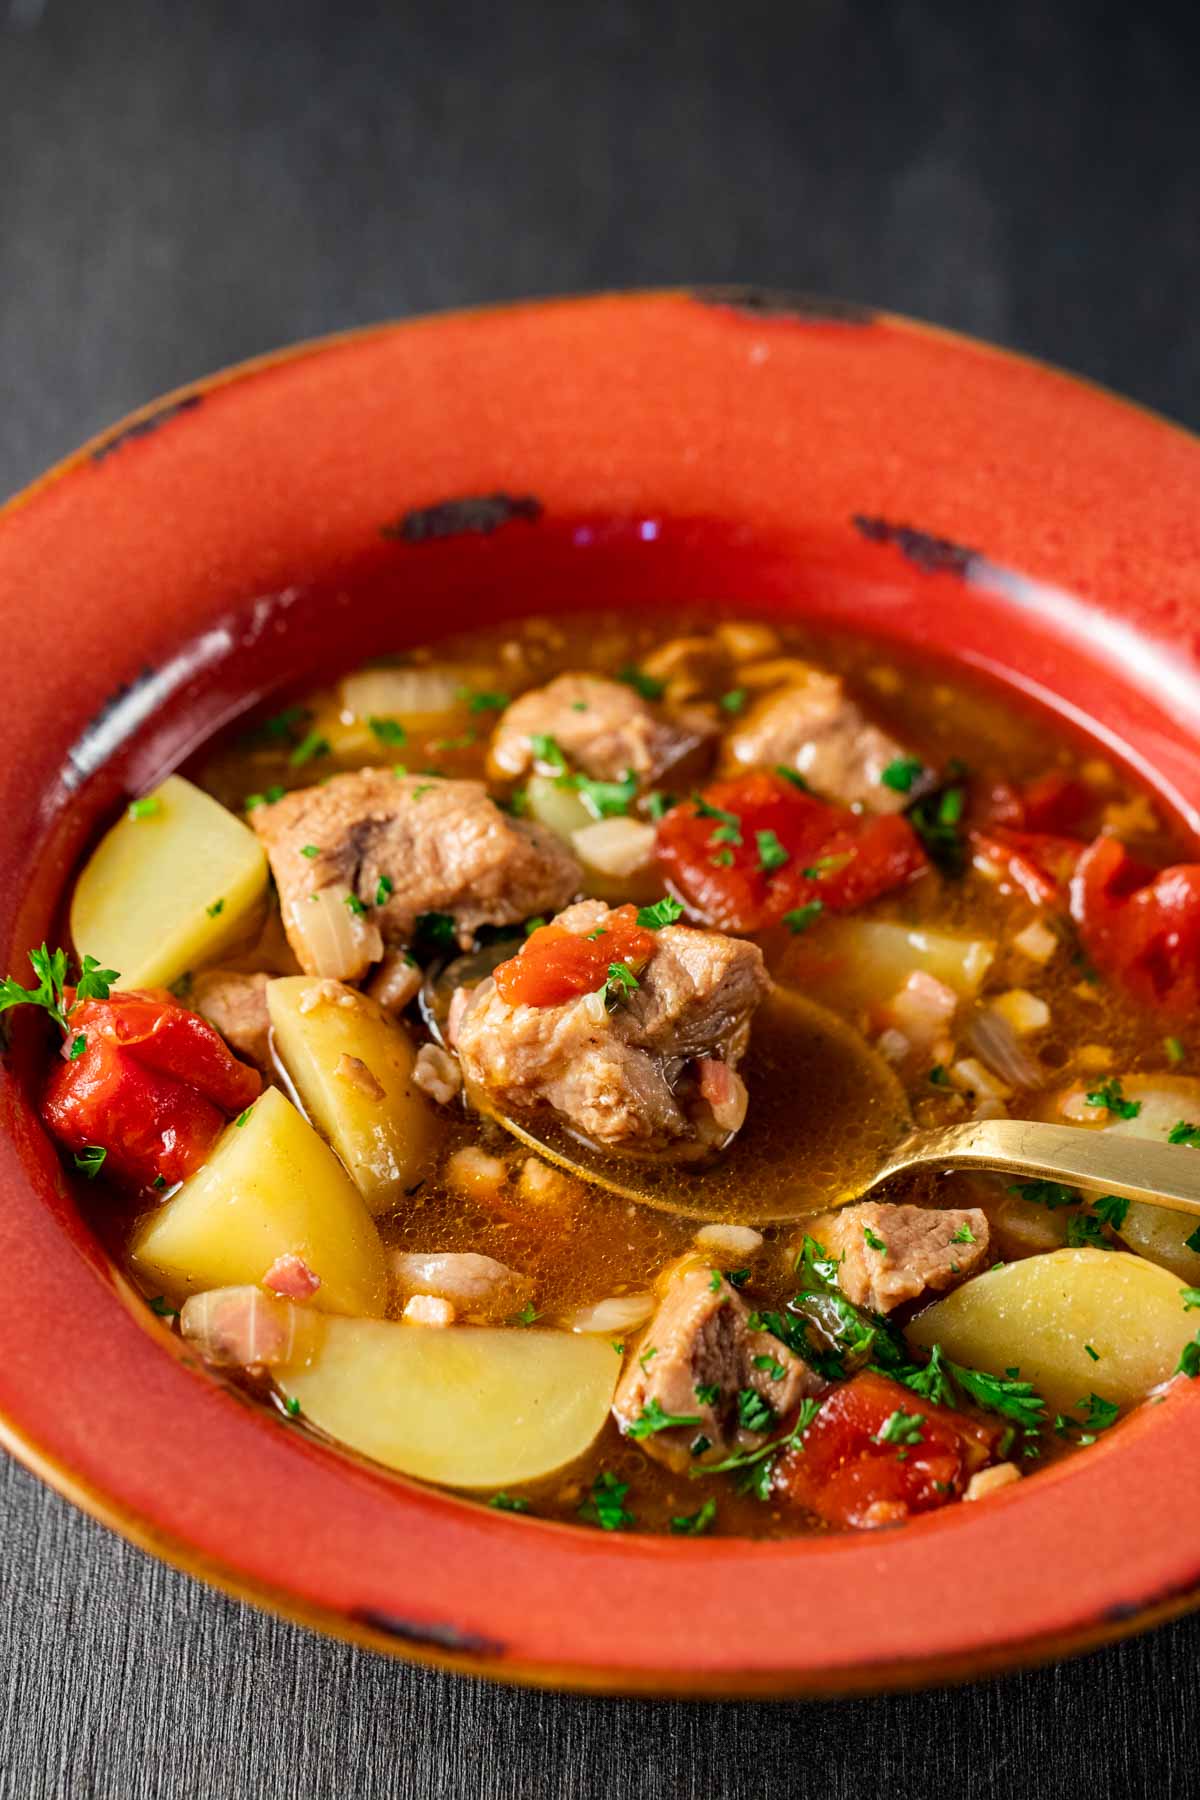 Side view of a bowl of veal stew with a spoon lifting some out.